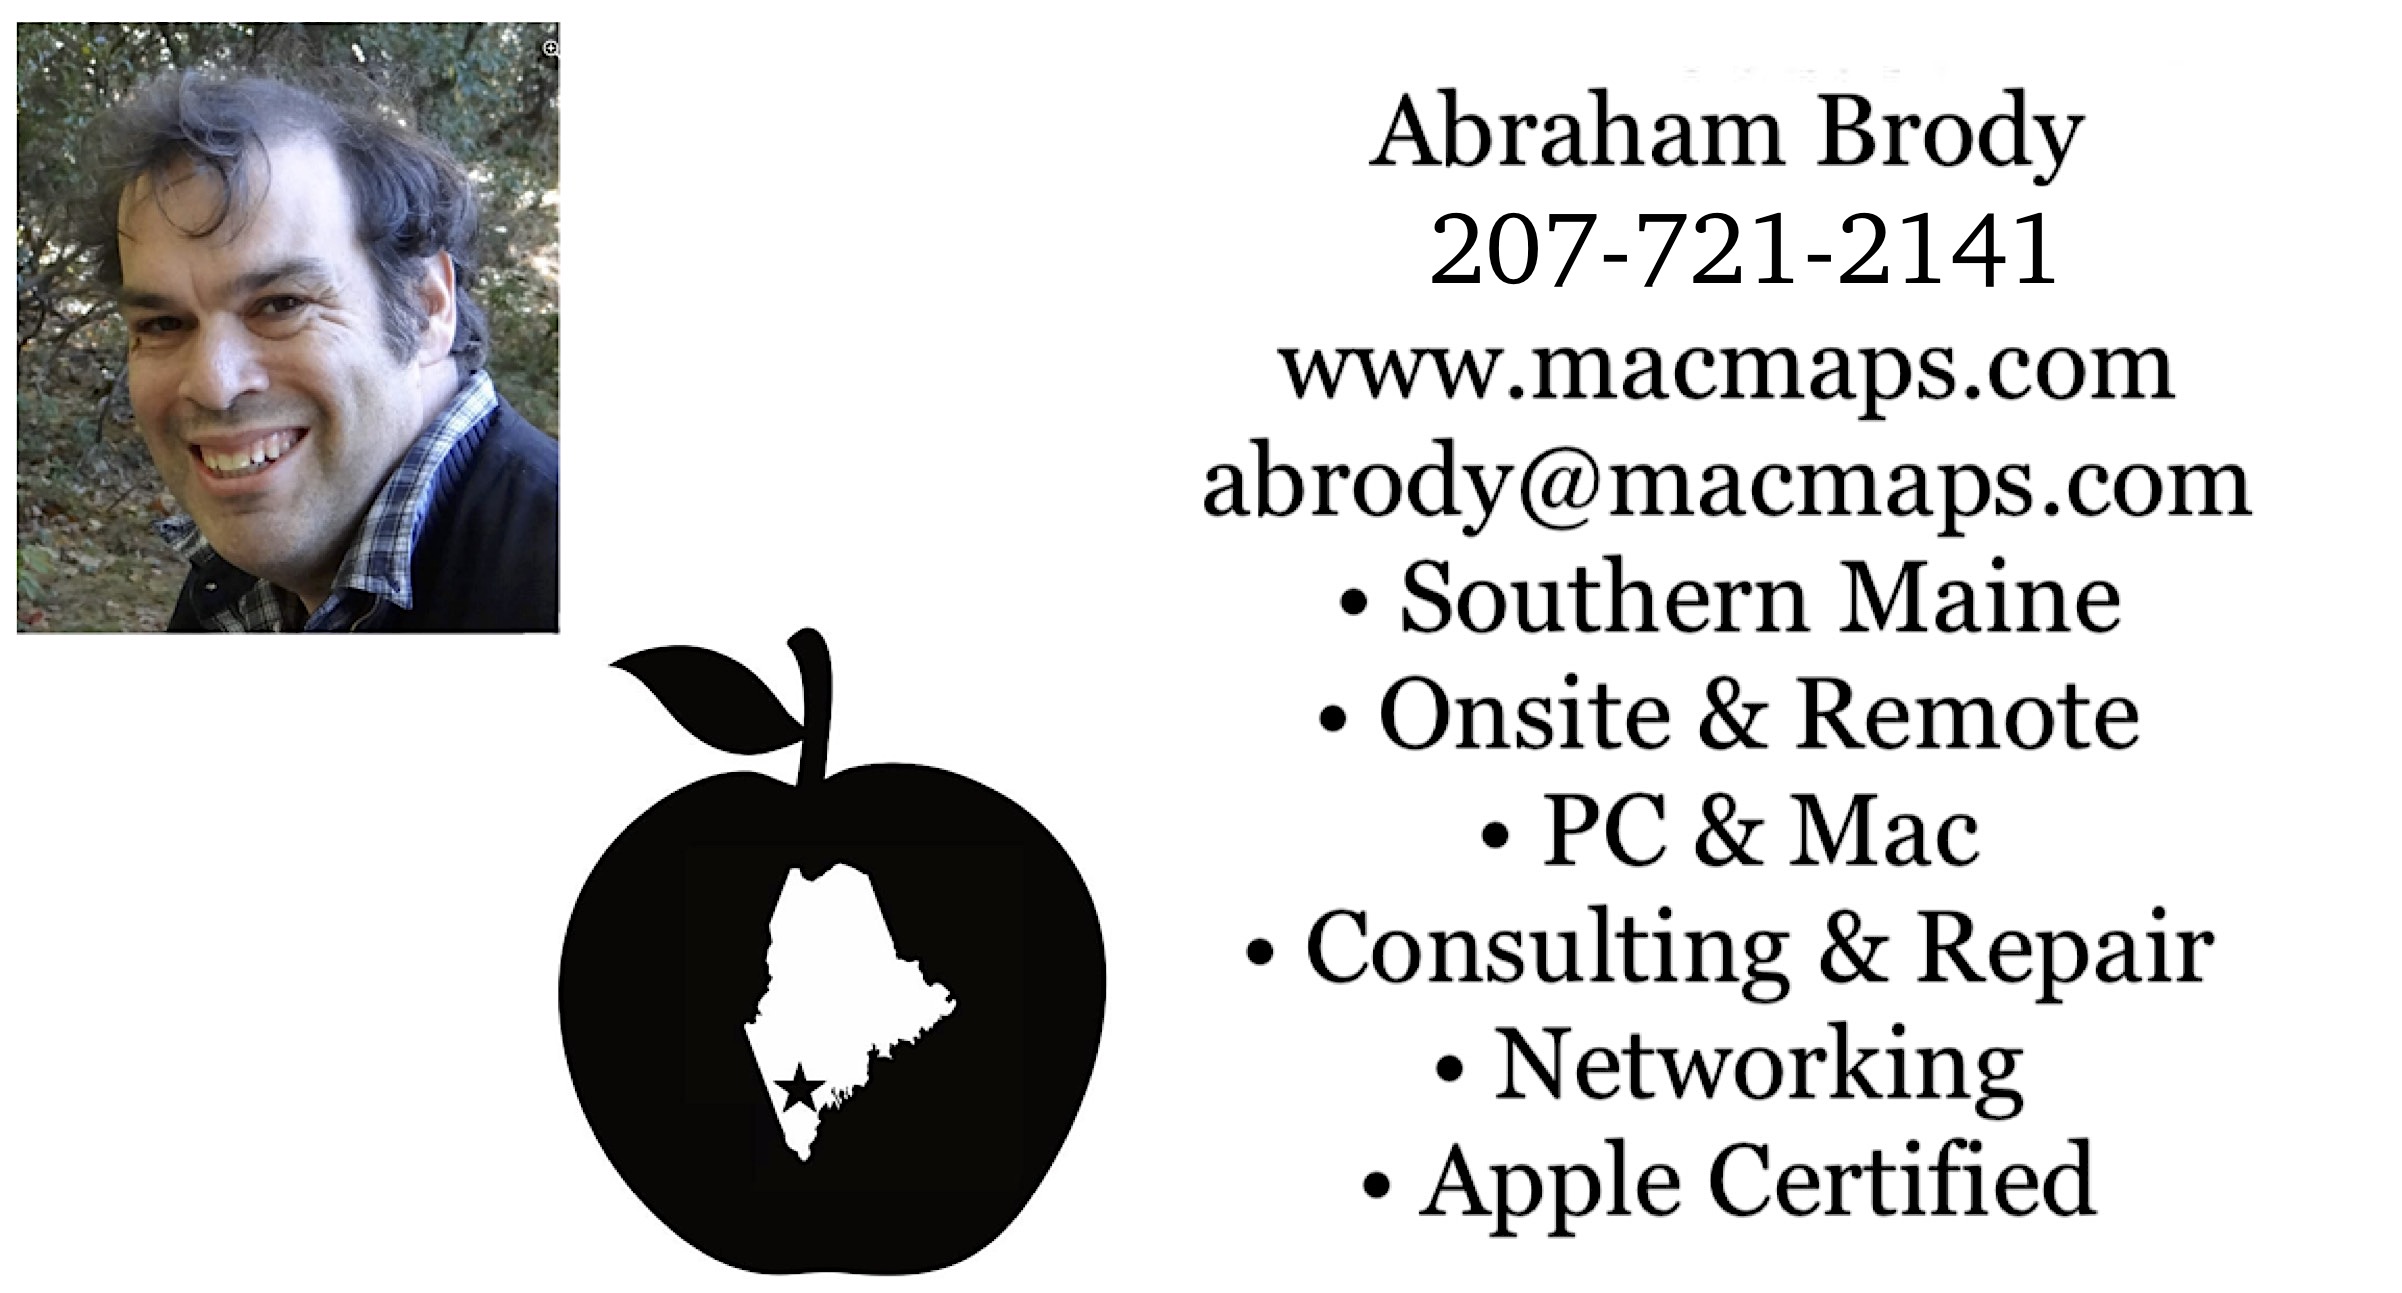 Macmaps Cape Cod
and Plymouth PC/Mac Repair. Remote and Pickup/Dropoff. Call
202-538-1017 for an appointment